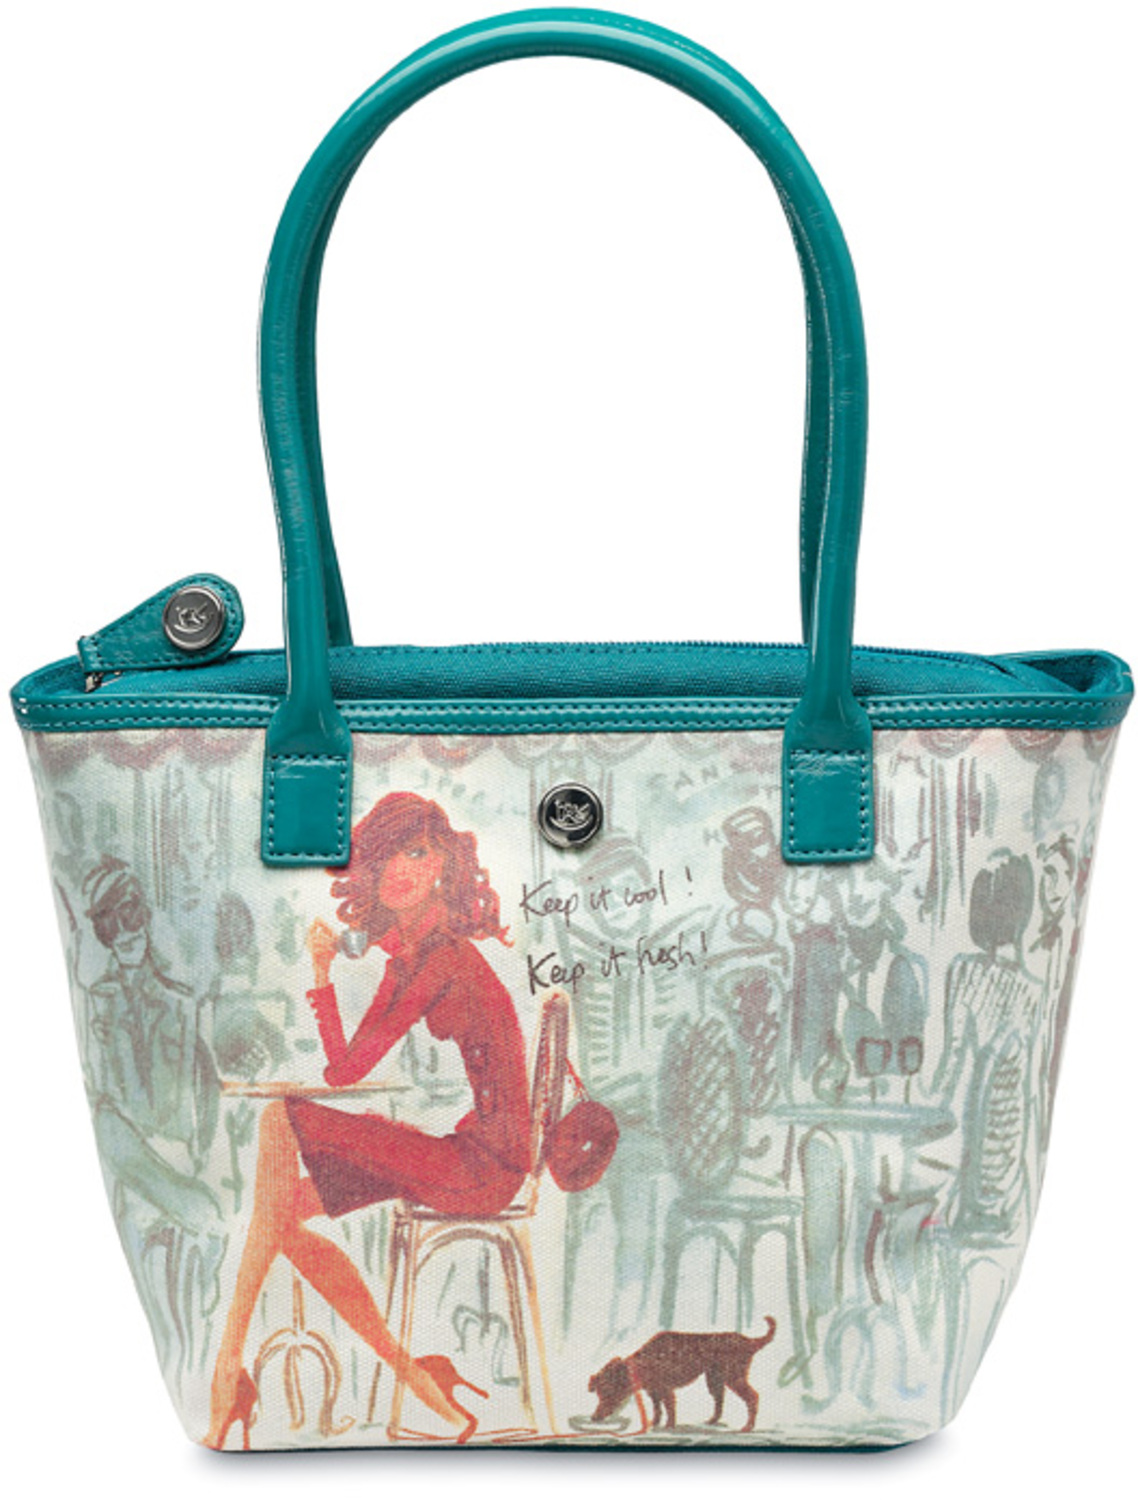 Keep it Cool! Keep it Fresh! by IZAK - Keep it Cool! Keep it Fresh! - 11.5" x 8" Insulated Lunch Tote